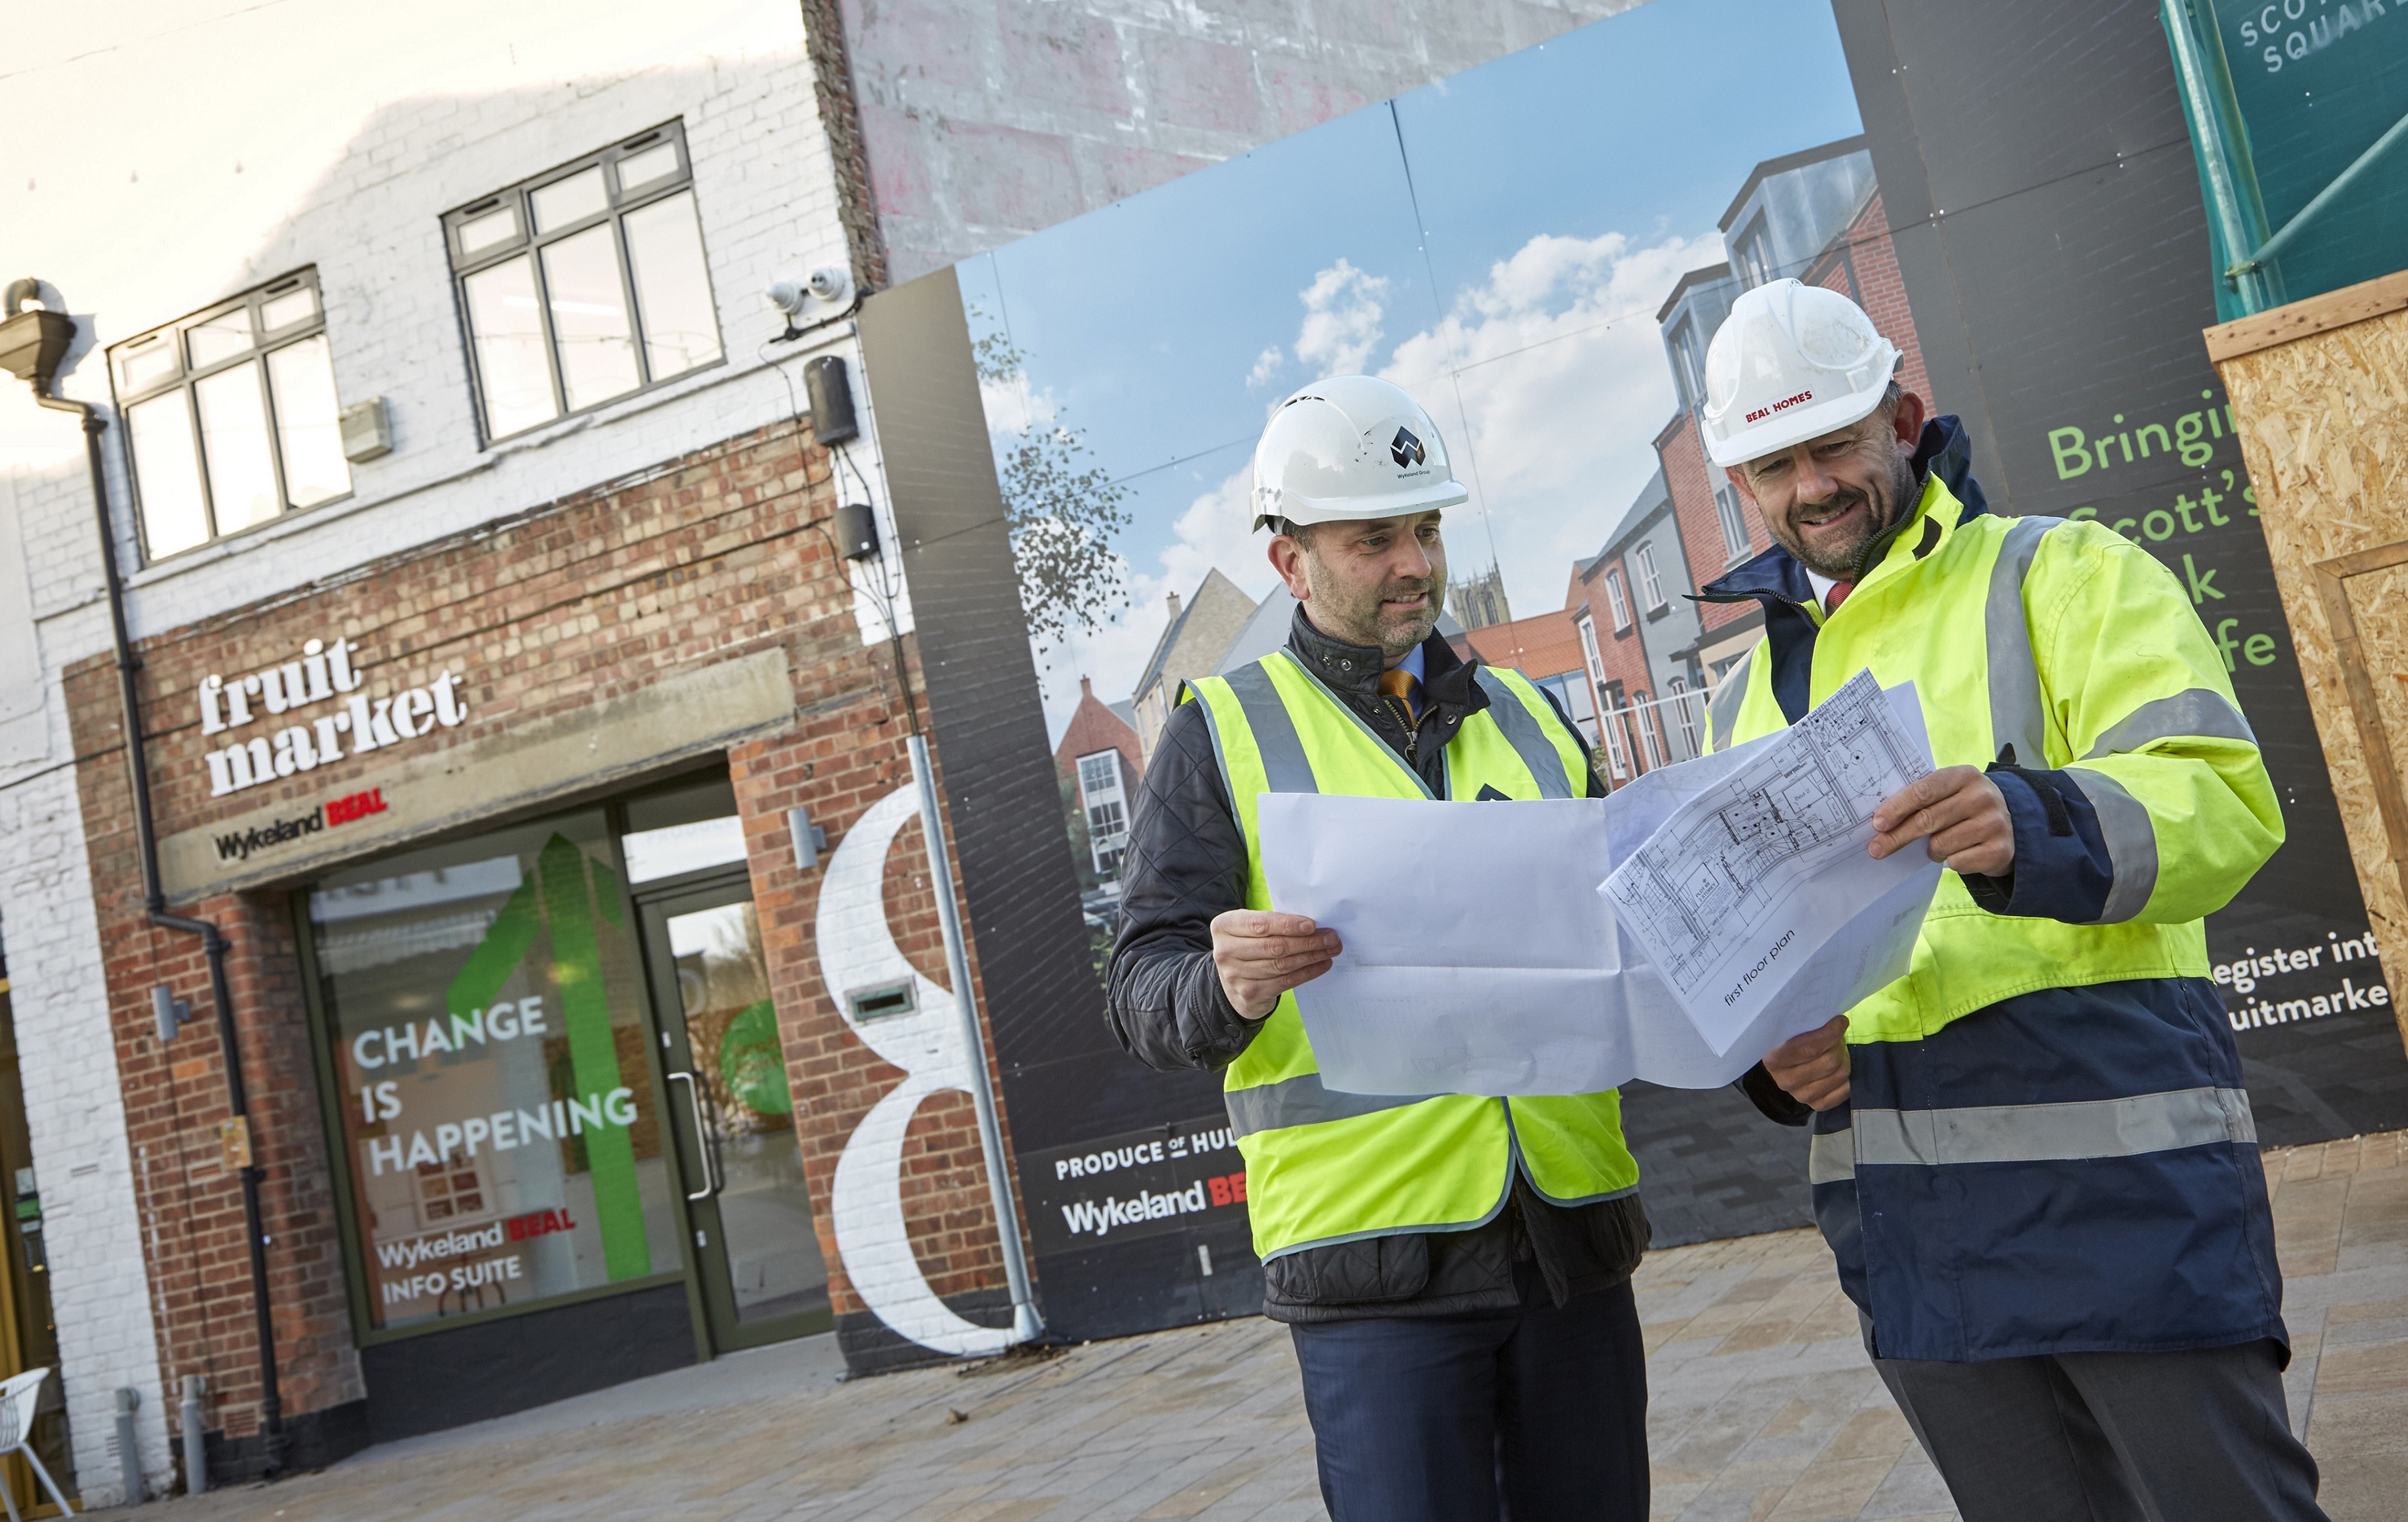 Launch event for new homes within Hull’s first urban village